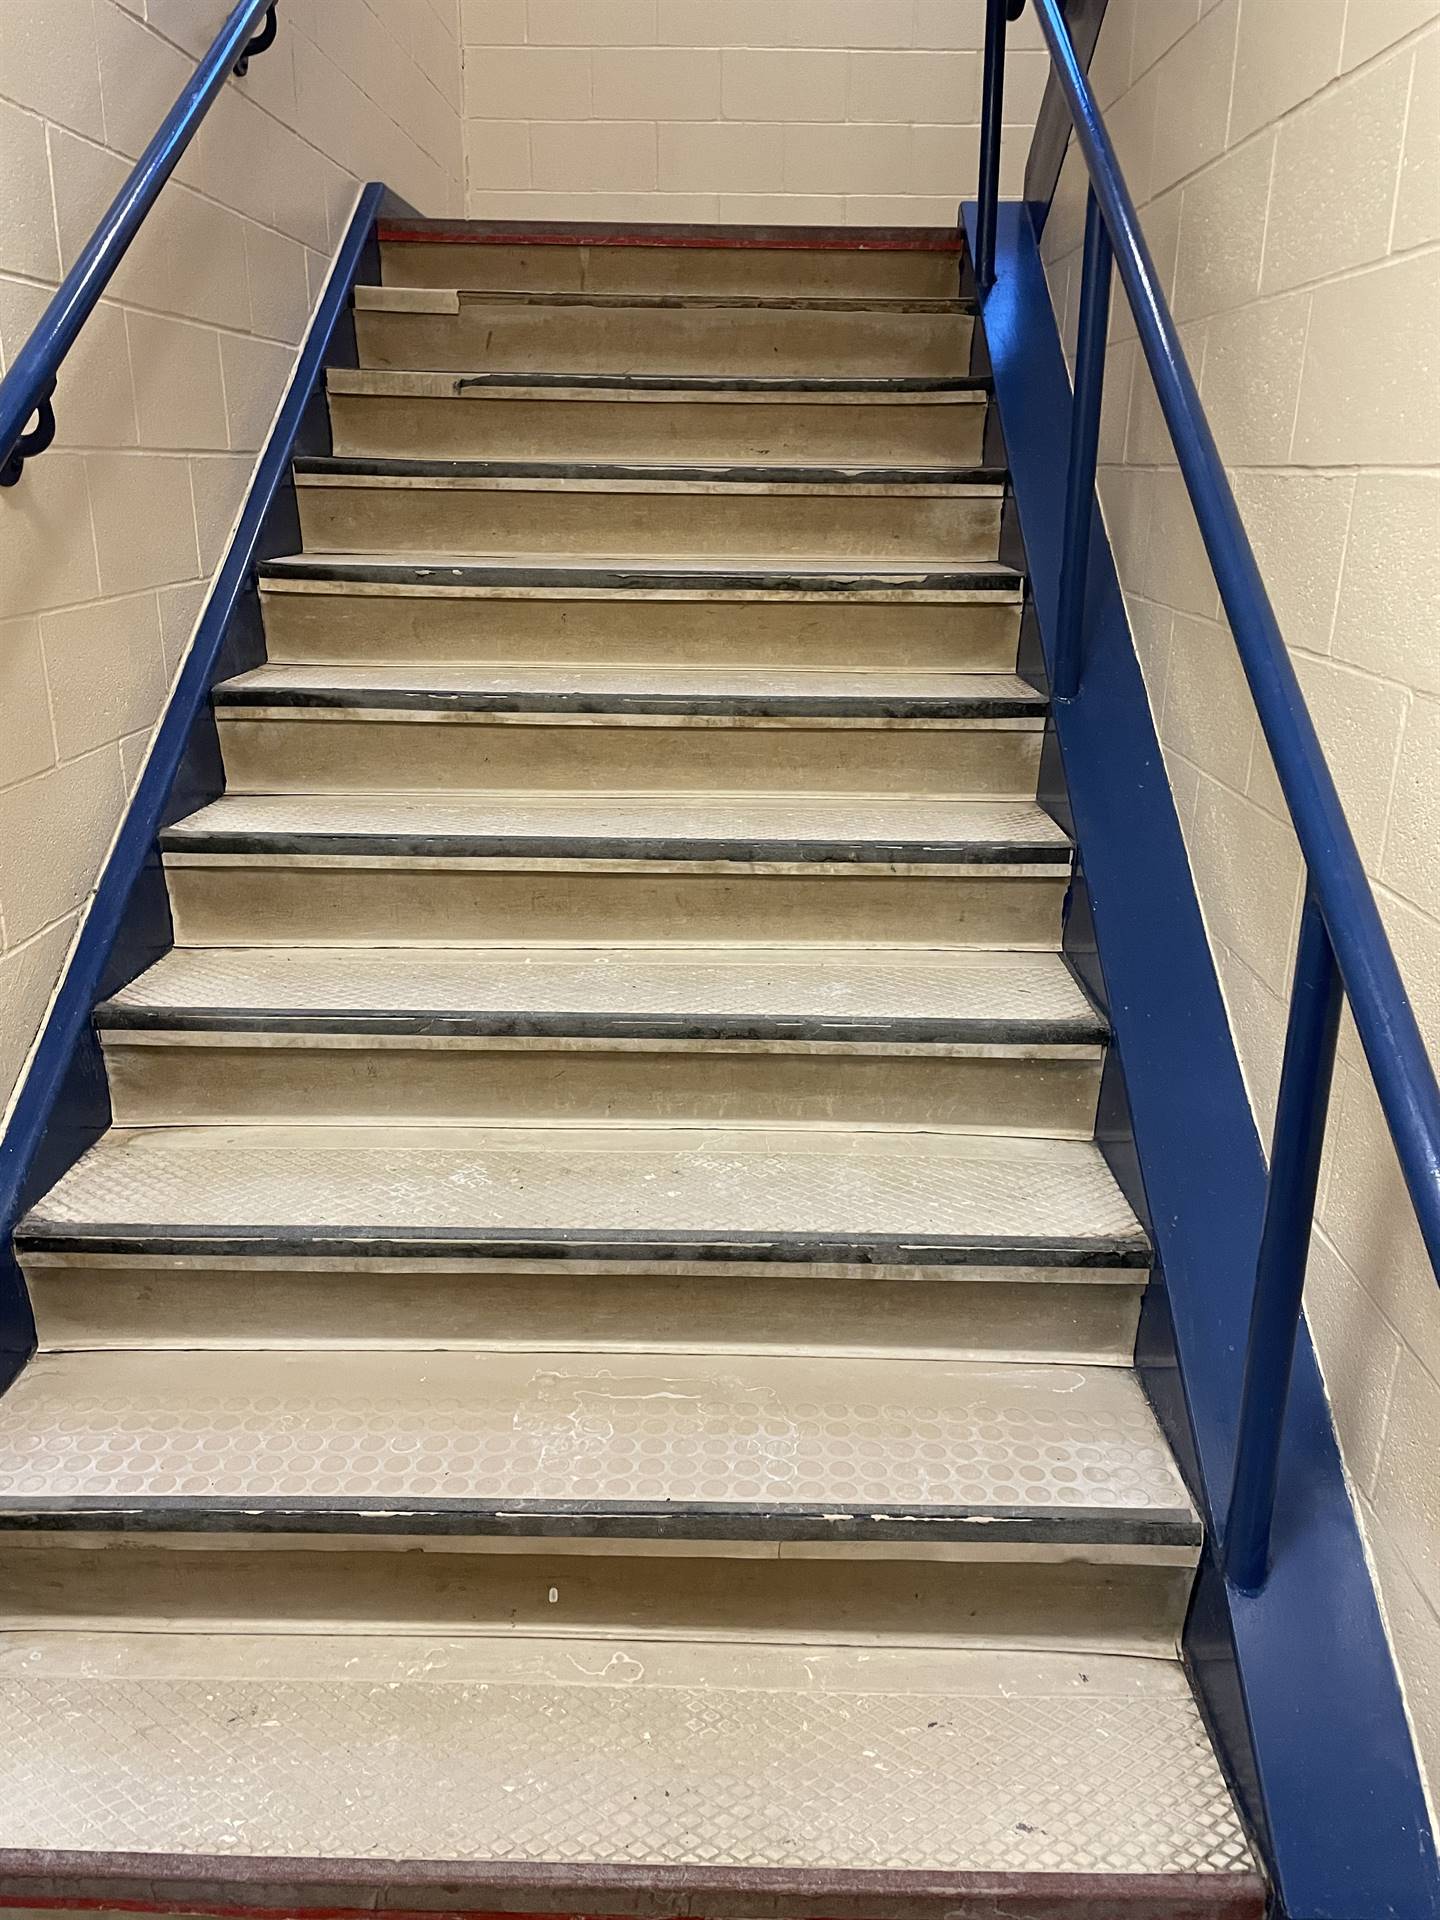 Middle School Stairs - across from District Office